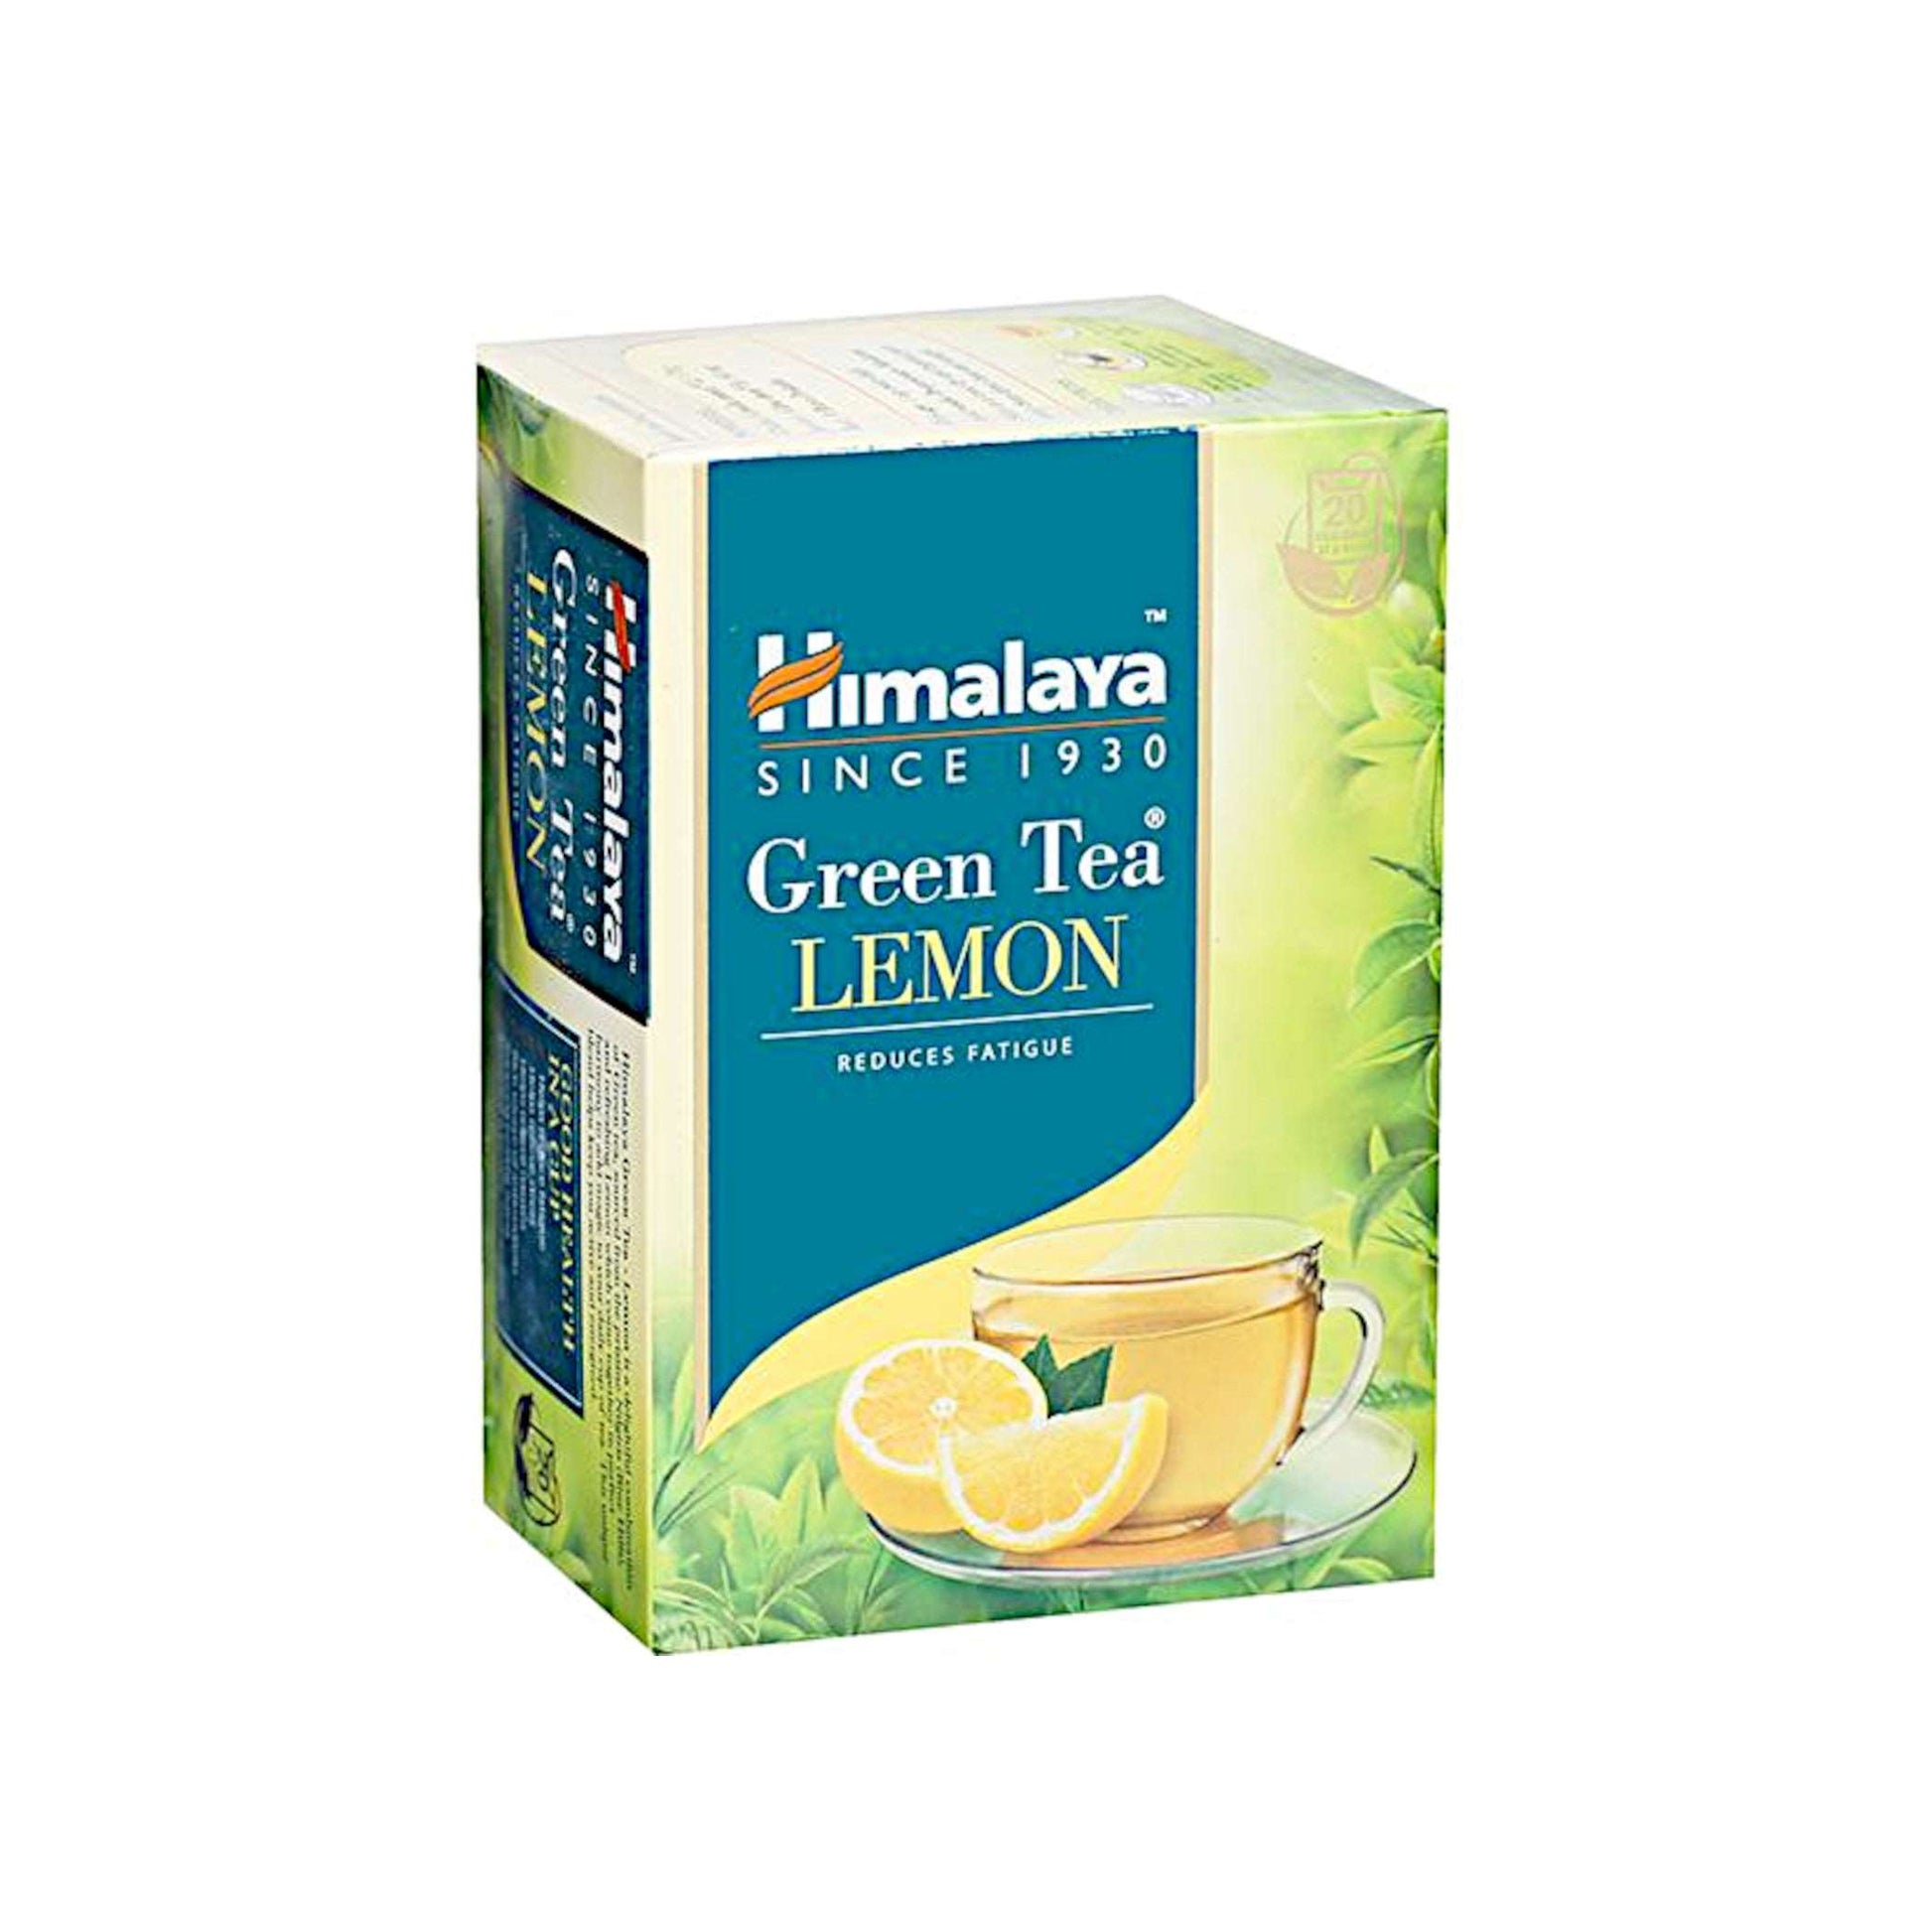 Image: Himalaya Herbals Green Tea Lemon 20 Teabags: Energizing, stress-relief, and metabolism support.